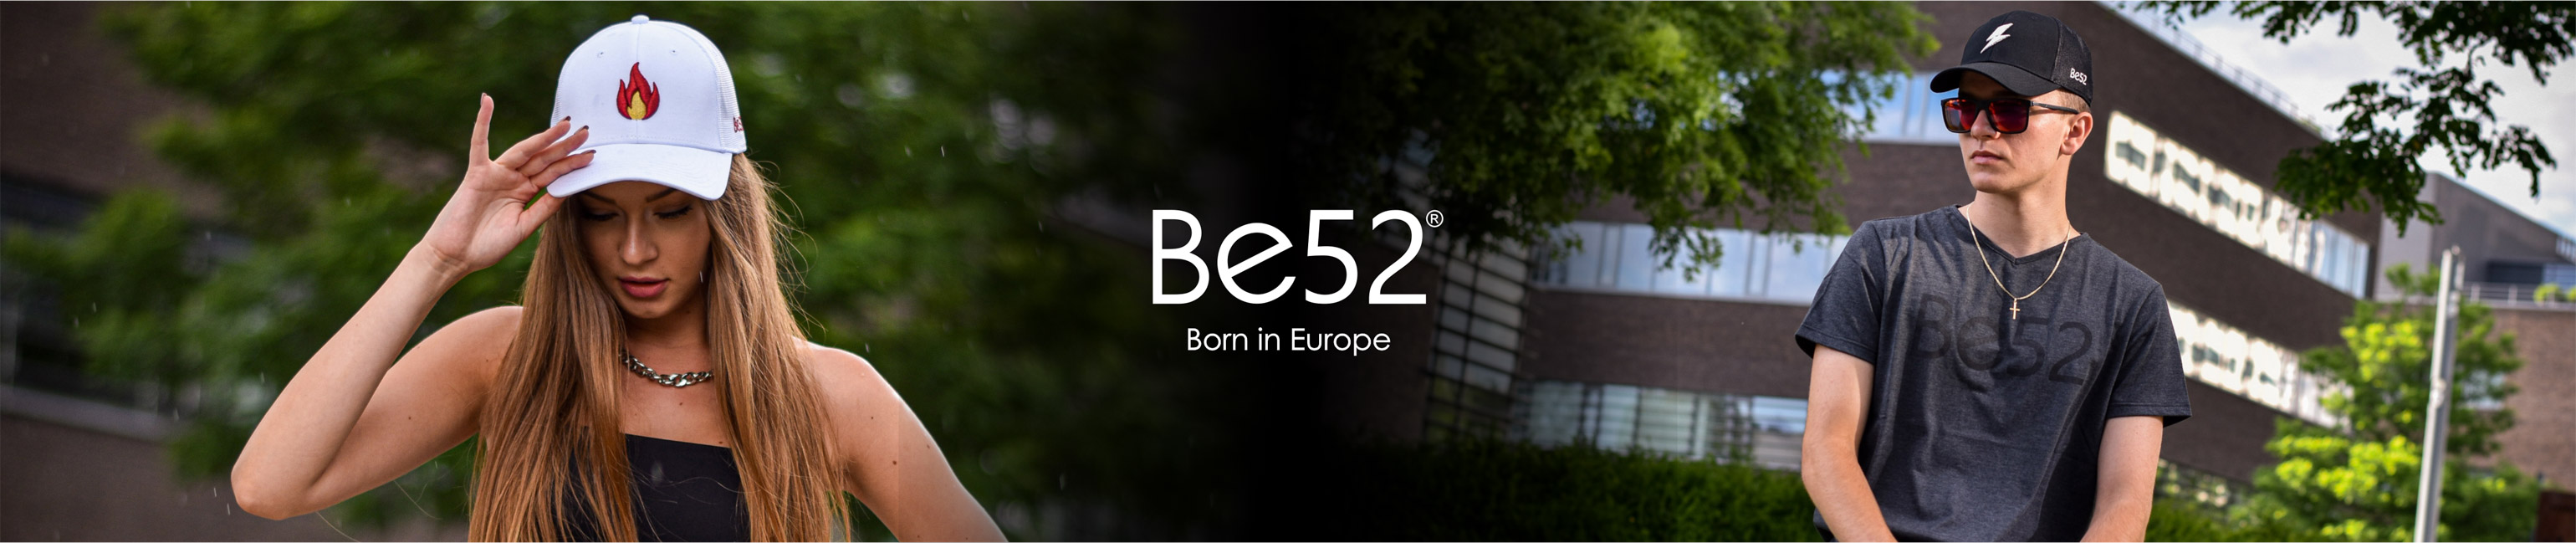 Be52